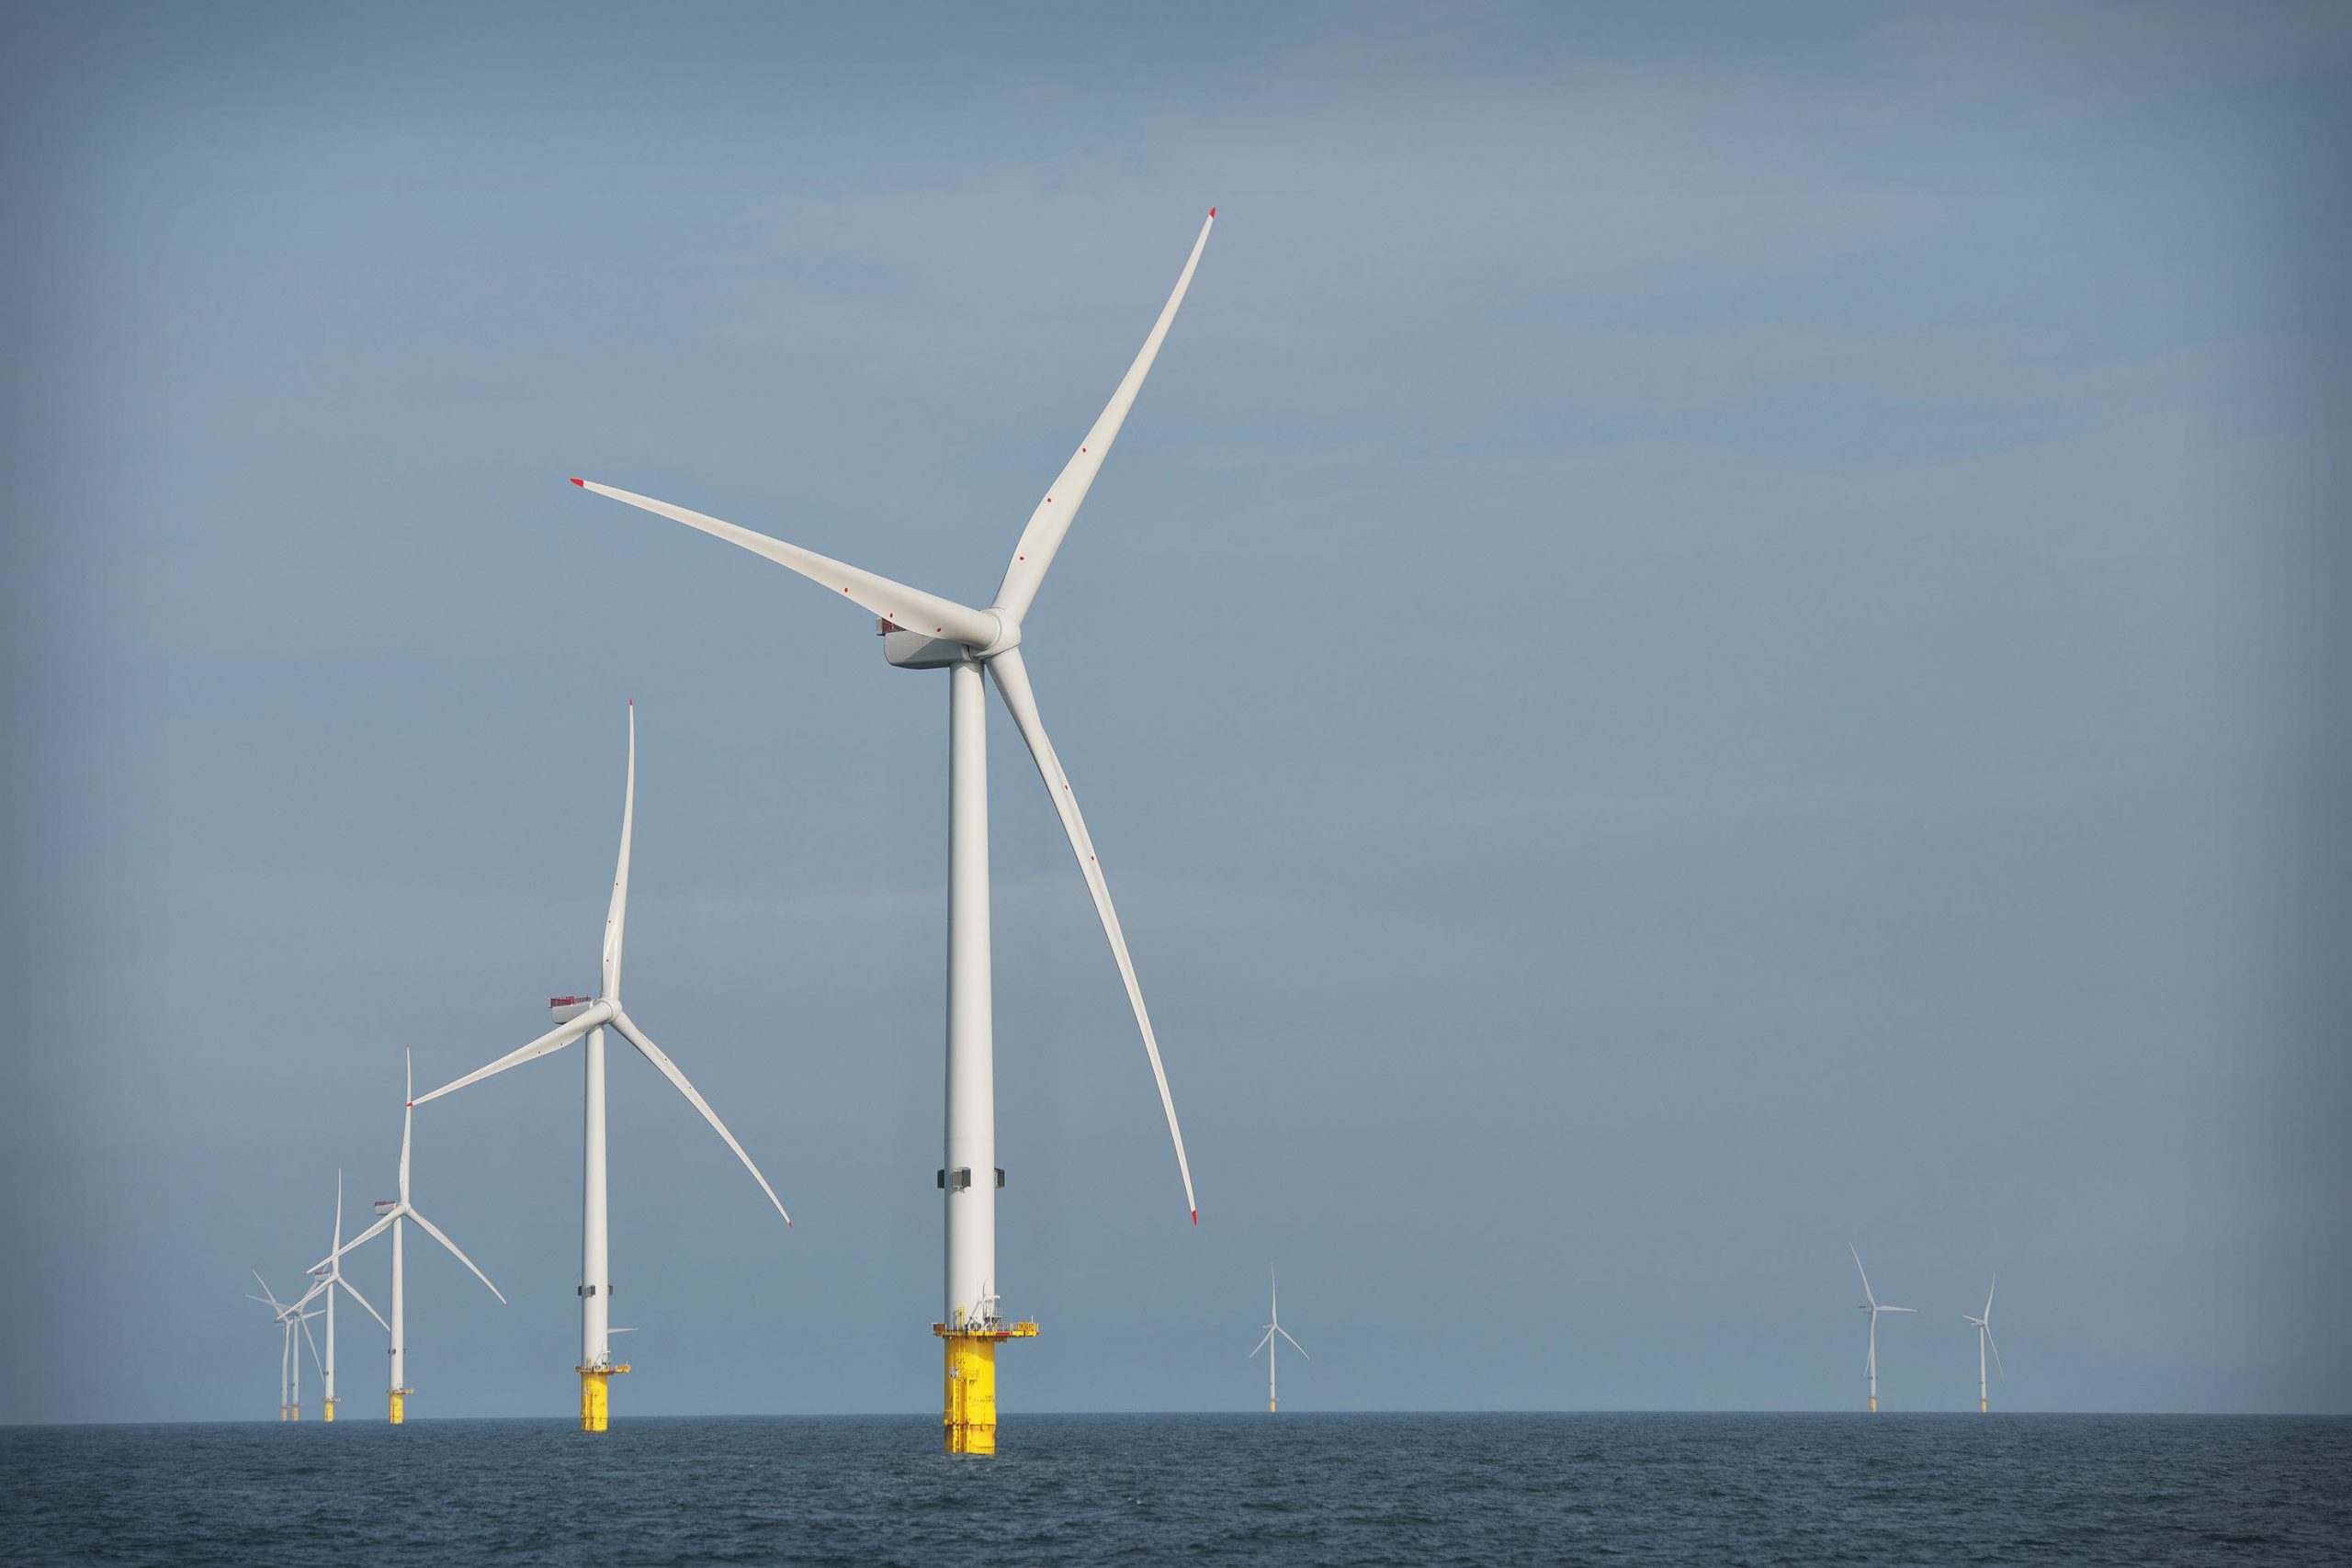 Final wind turbine successfully installed at Triton Knoll offshore wind farm